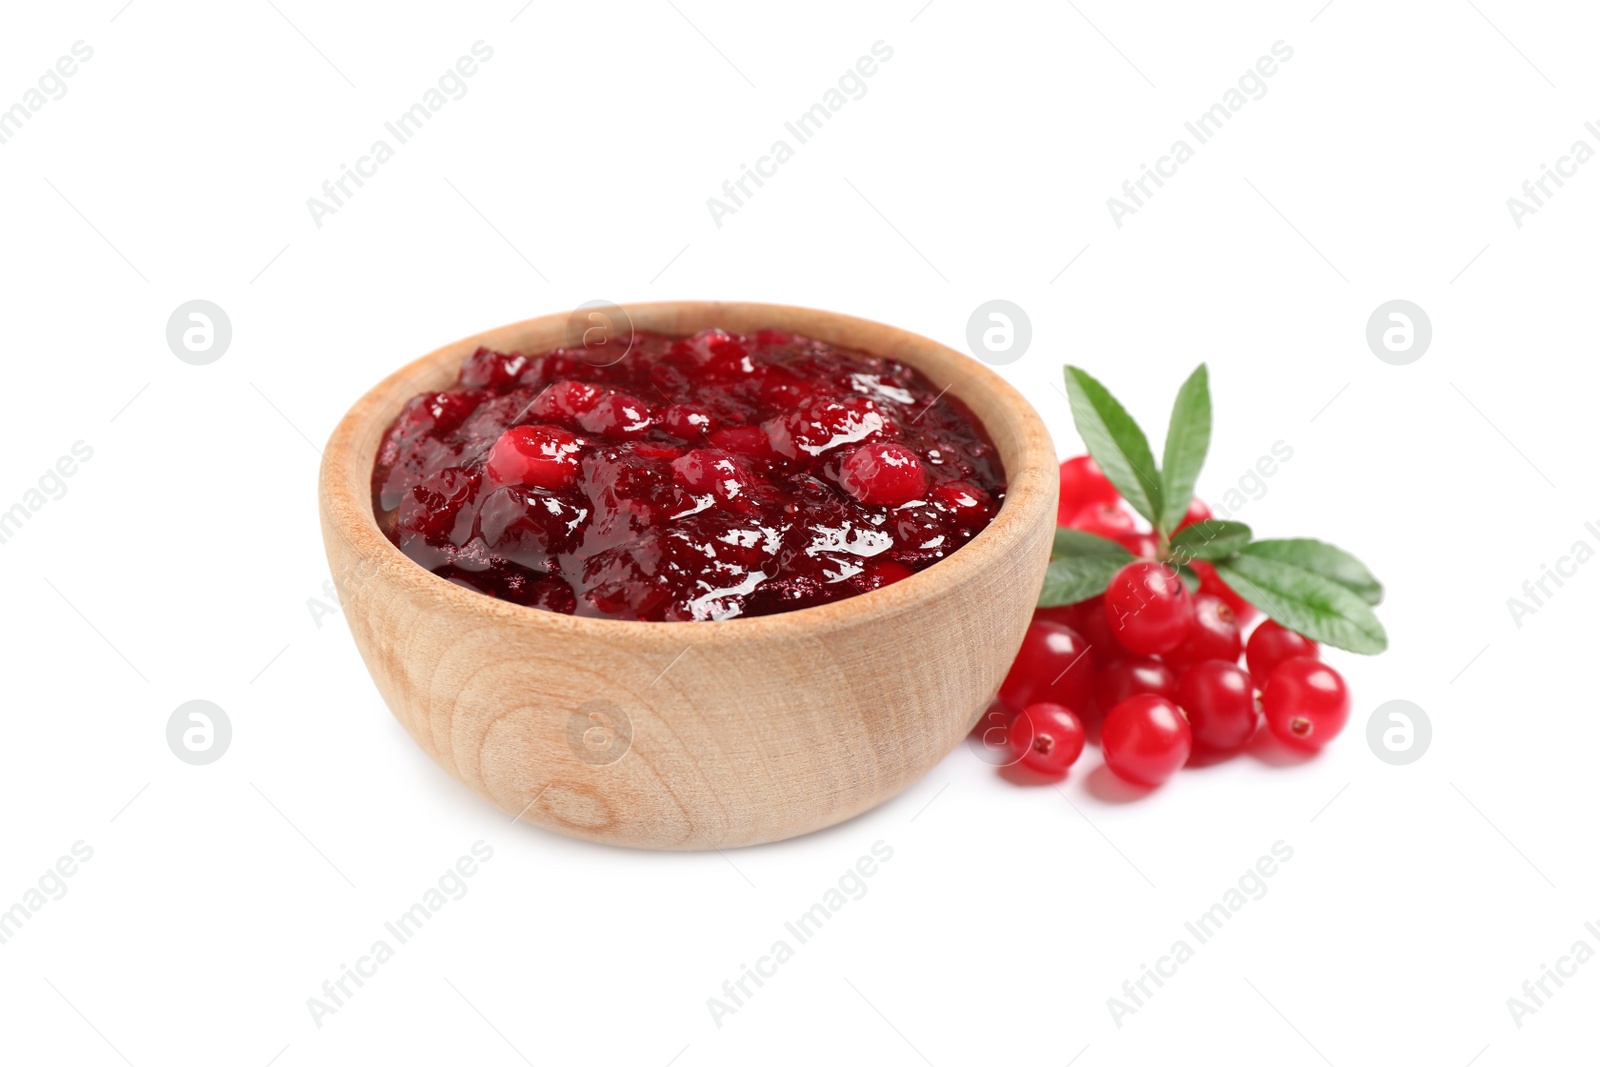 Photo of Cranberry sauce and fresh berries on white background